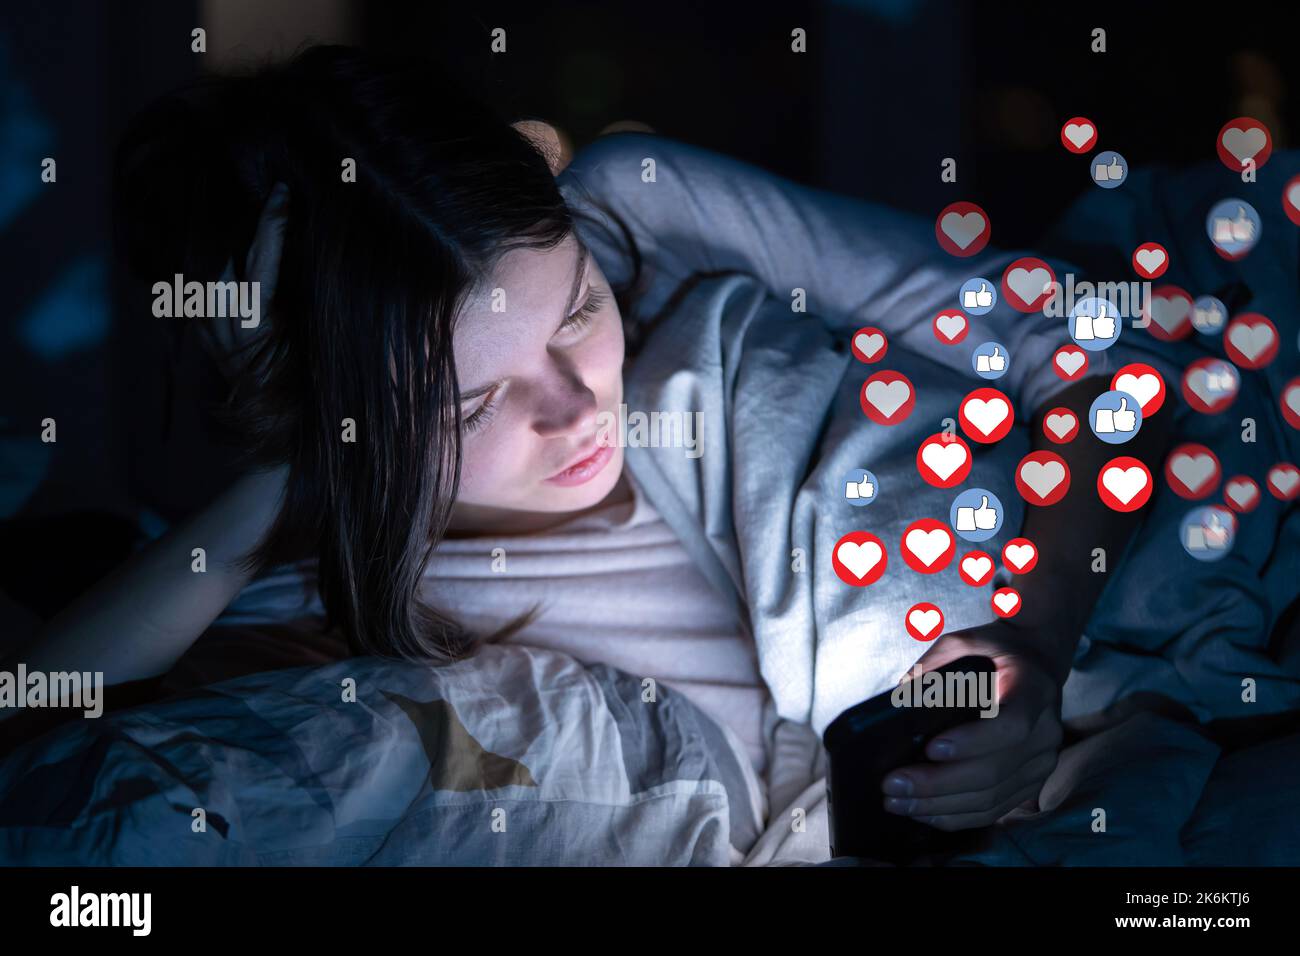 Girl with phone at night, receives hearts and likes. Stock Photo